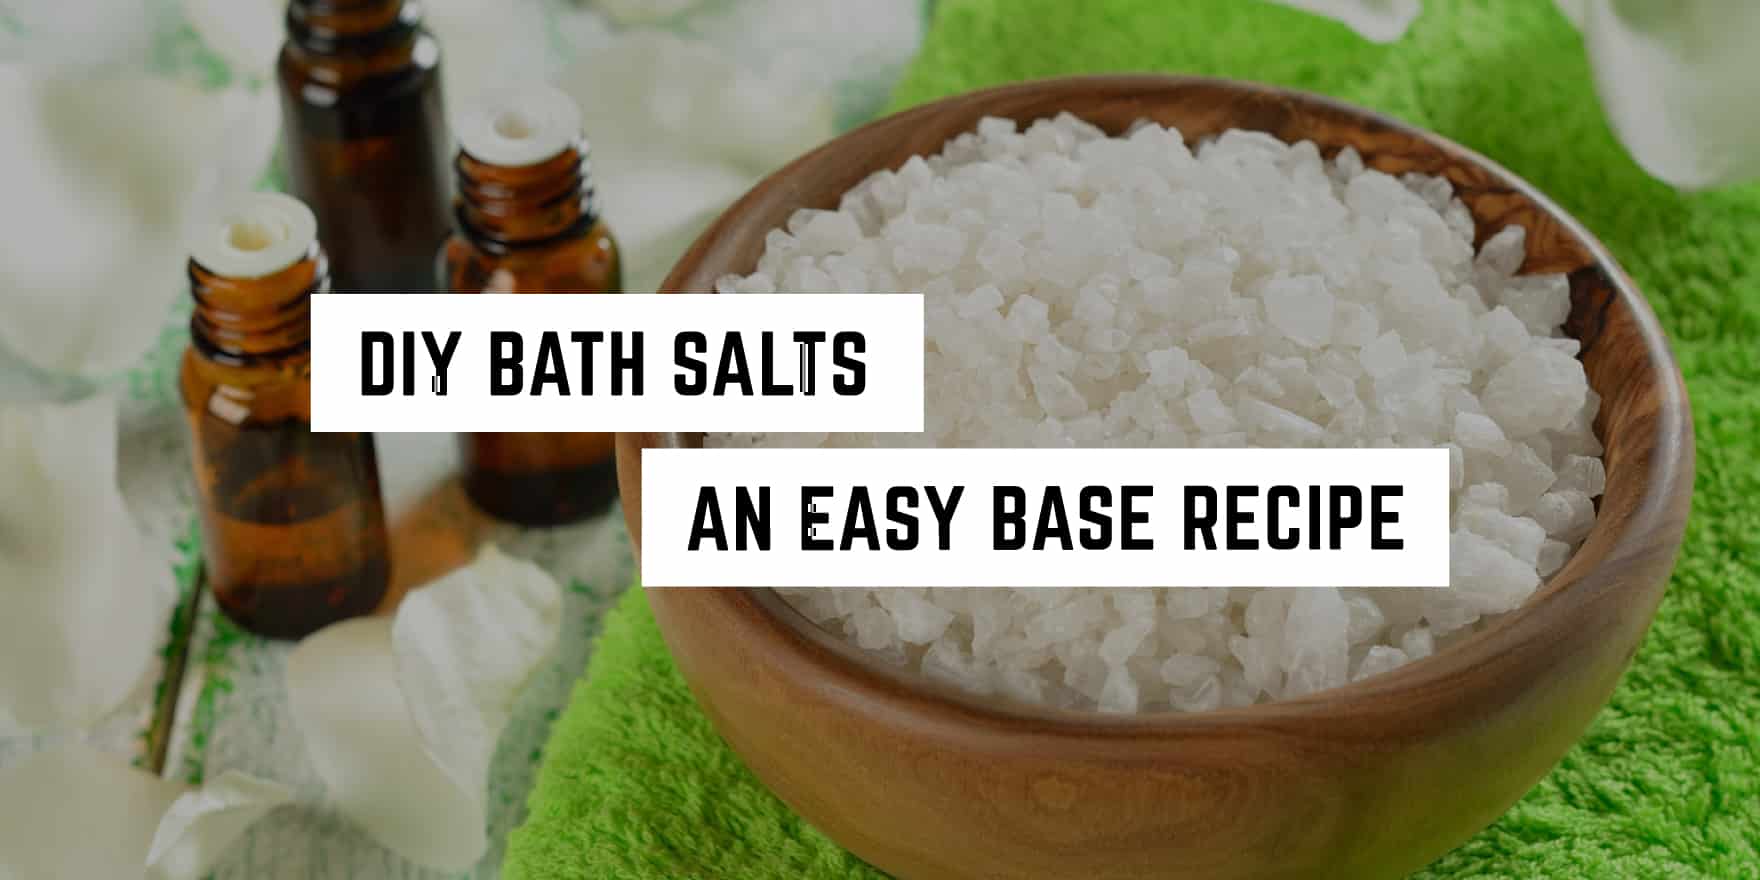 Create your own relaxation oasis with diy bath salts: an easy metaphysical base recipe.